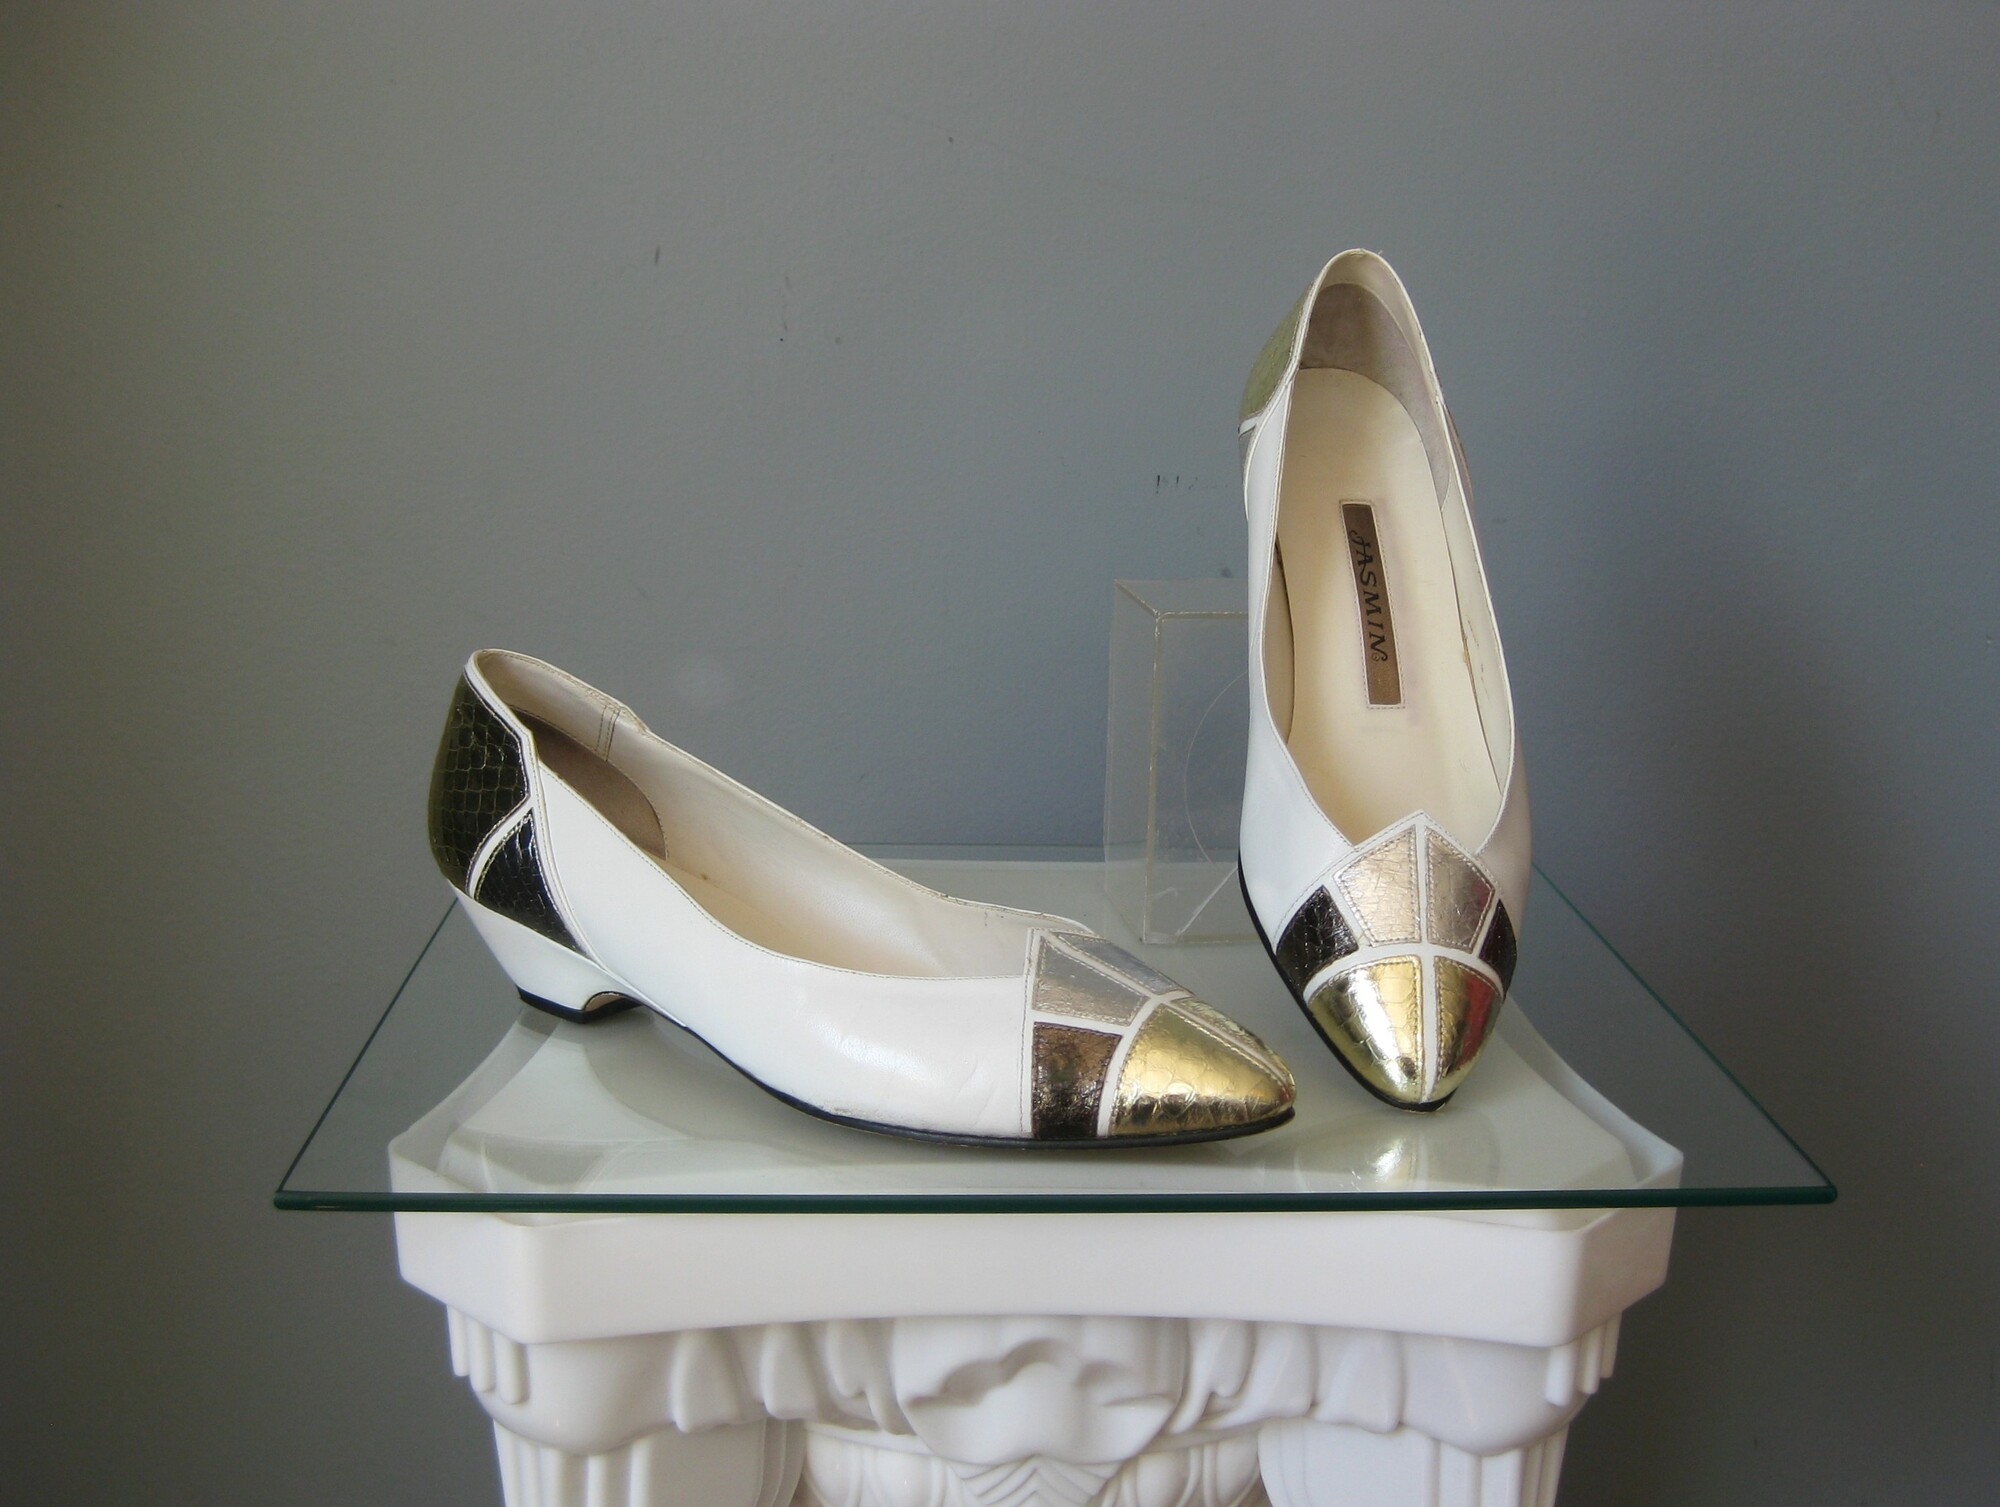 Vtg Jasmine Flats, Goldwh, Size: 8
This pair of low heeled pumps from the 1980s is by Jasmin.  They're high quality and give a lot of versatility by successfully mixing gold and silver metallics with the over all white leather body.
This model is called Electric and they're size 8
Made in Hong Kong

Excellent condition with almost no wear, just a teeny bit of dirt near the bottom edge on one of the shoes.

Heel: 1.5
Insole length:9 3/4
Insole width: a shade over 3 at the widest spot

PLEASE NOTE: the box is shown for information documentation purposes ONLY I will not be shipping these with their box as it was not in the same great shape as the shoes.

Thanks for looking!
#45255